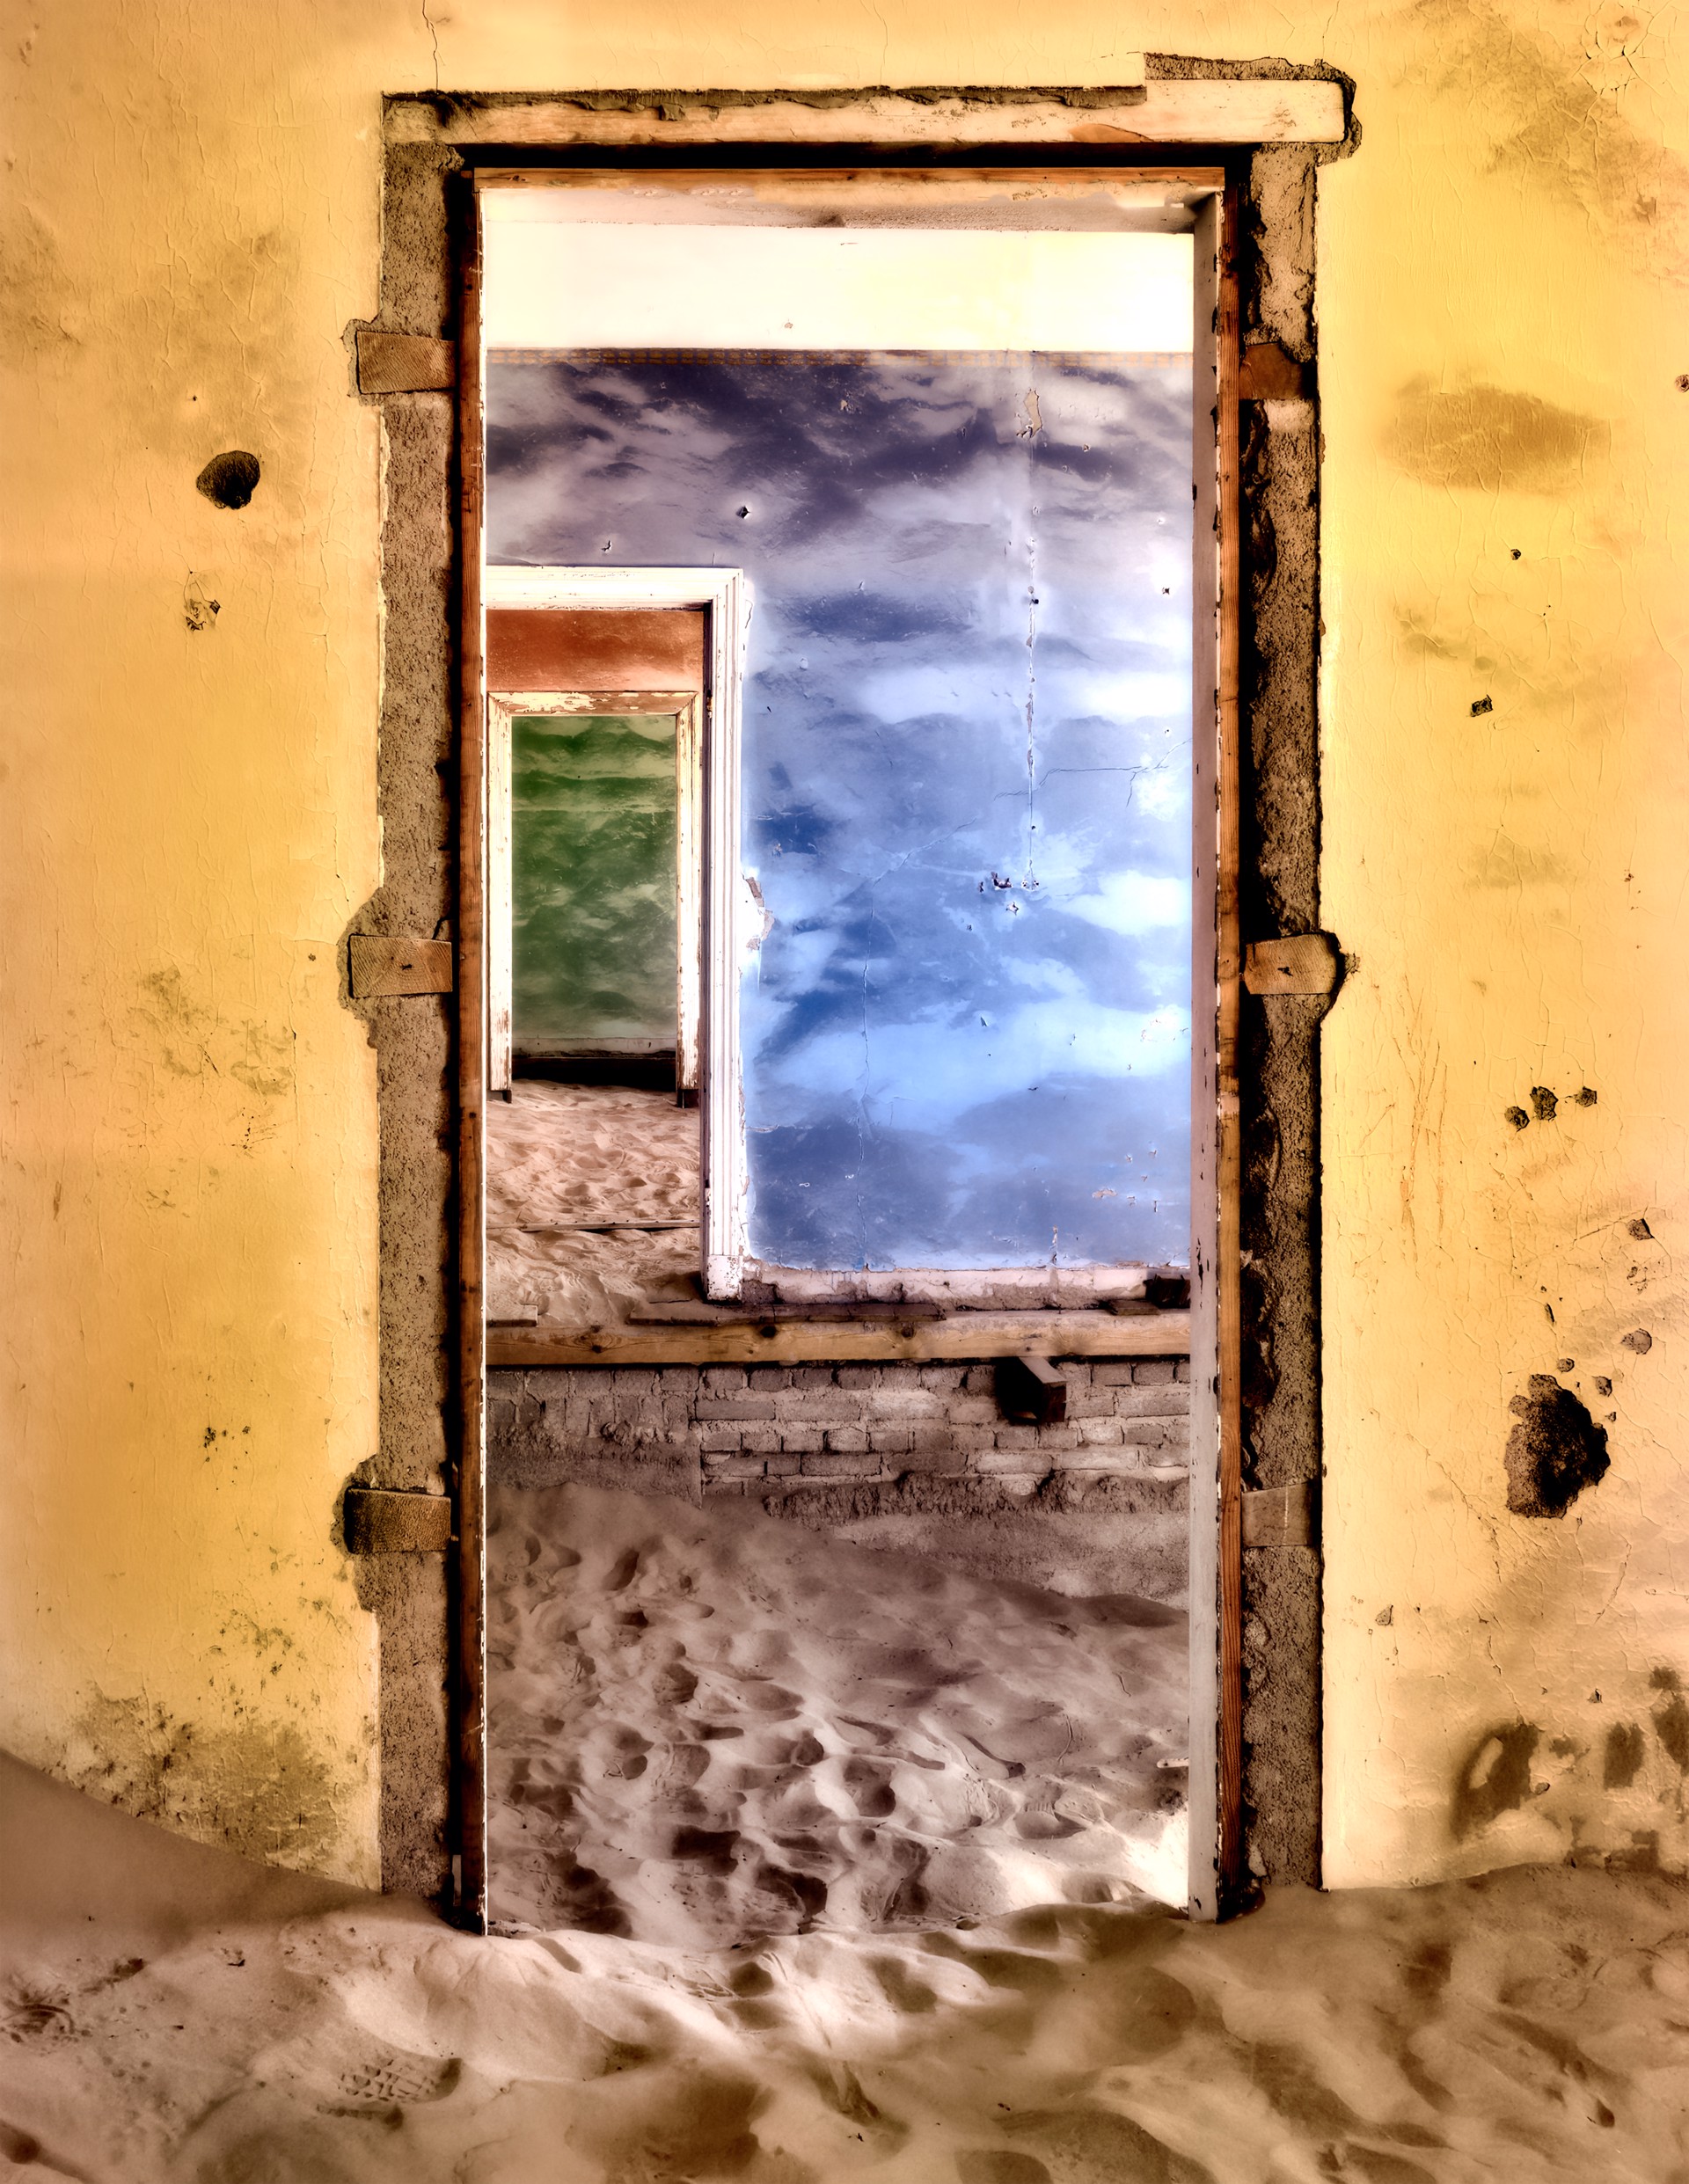 Hall of Sand (Impressions) by Arnold Abelman